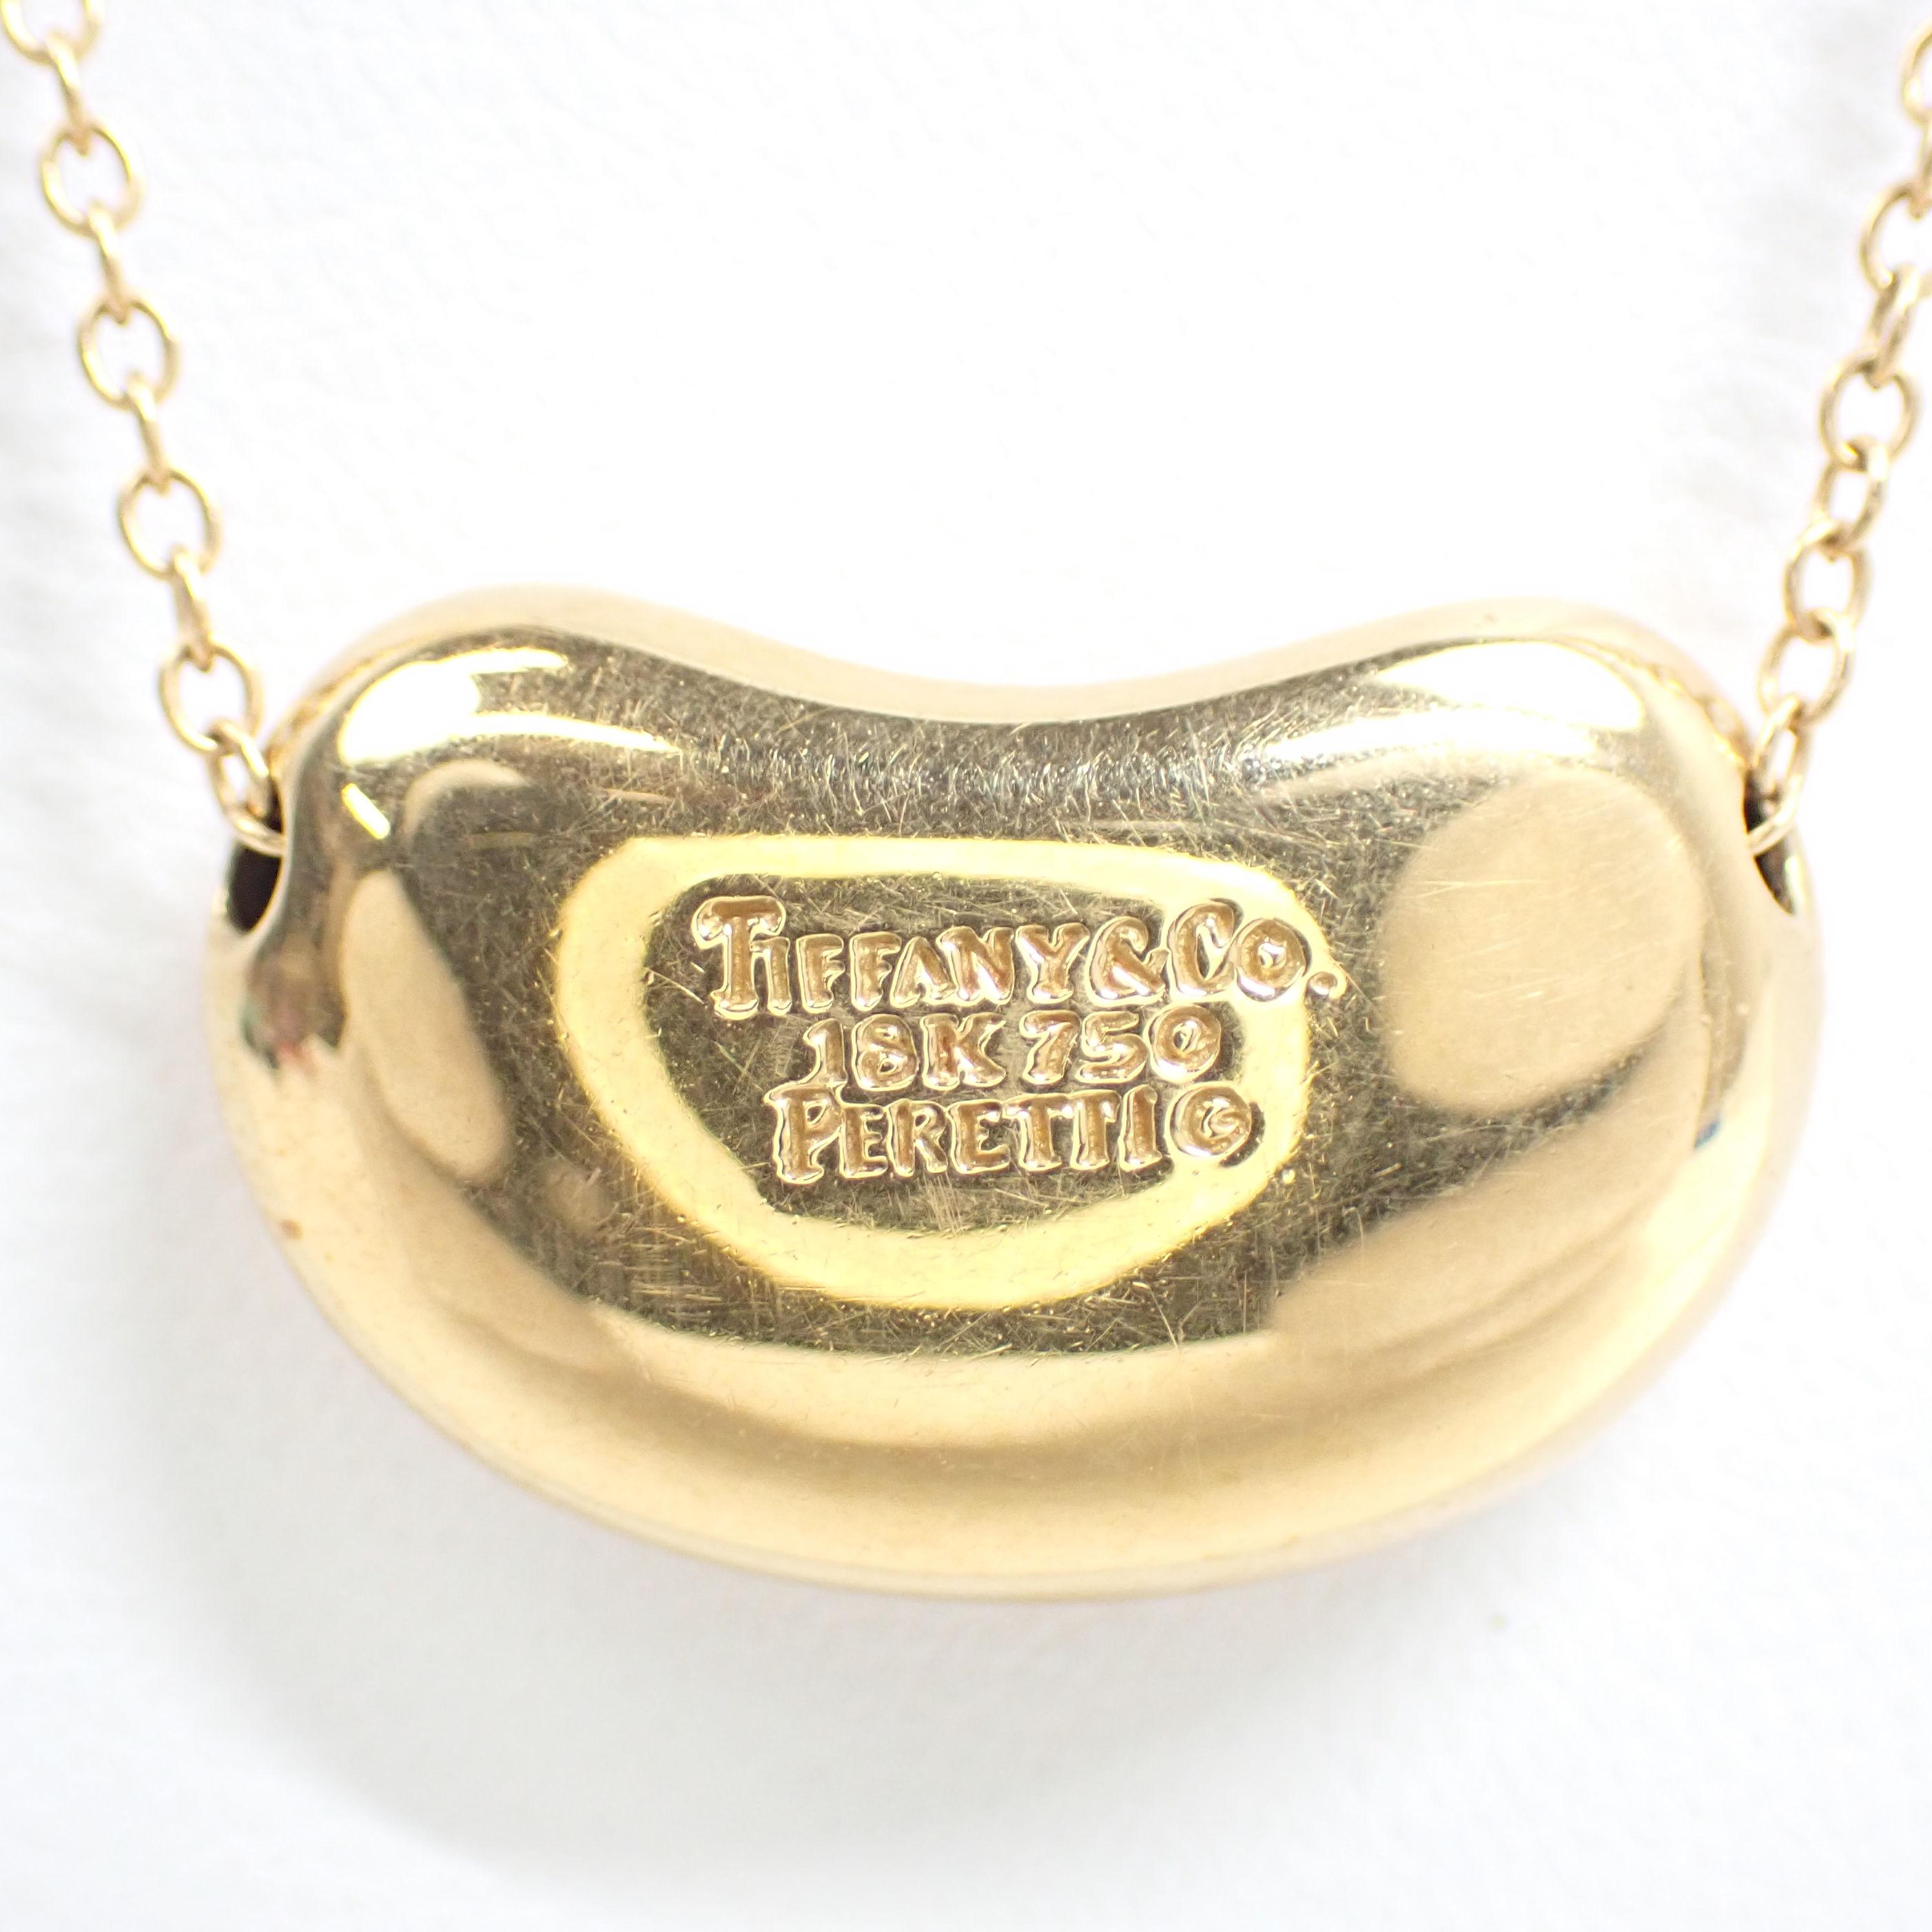 Brand : Tiffany & Co
Description: Tiffany & Co Bean NecklacePendant Colllier 18K Yellow Gold 750
Metal Type:  750YG/YELLOW GOLD
Total Weight:  5.4 g
Width:  14mm
Condition: Preowned; small signs of wearing
Box -  Included
Papers -   Not Included
